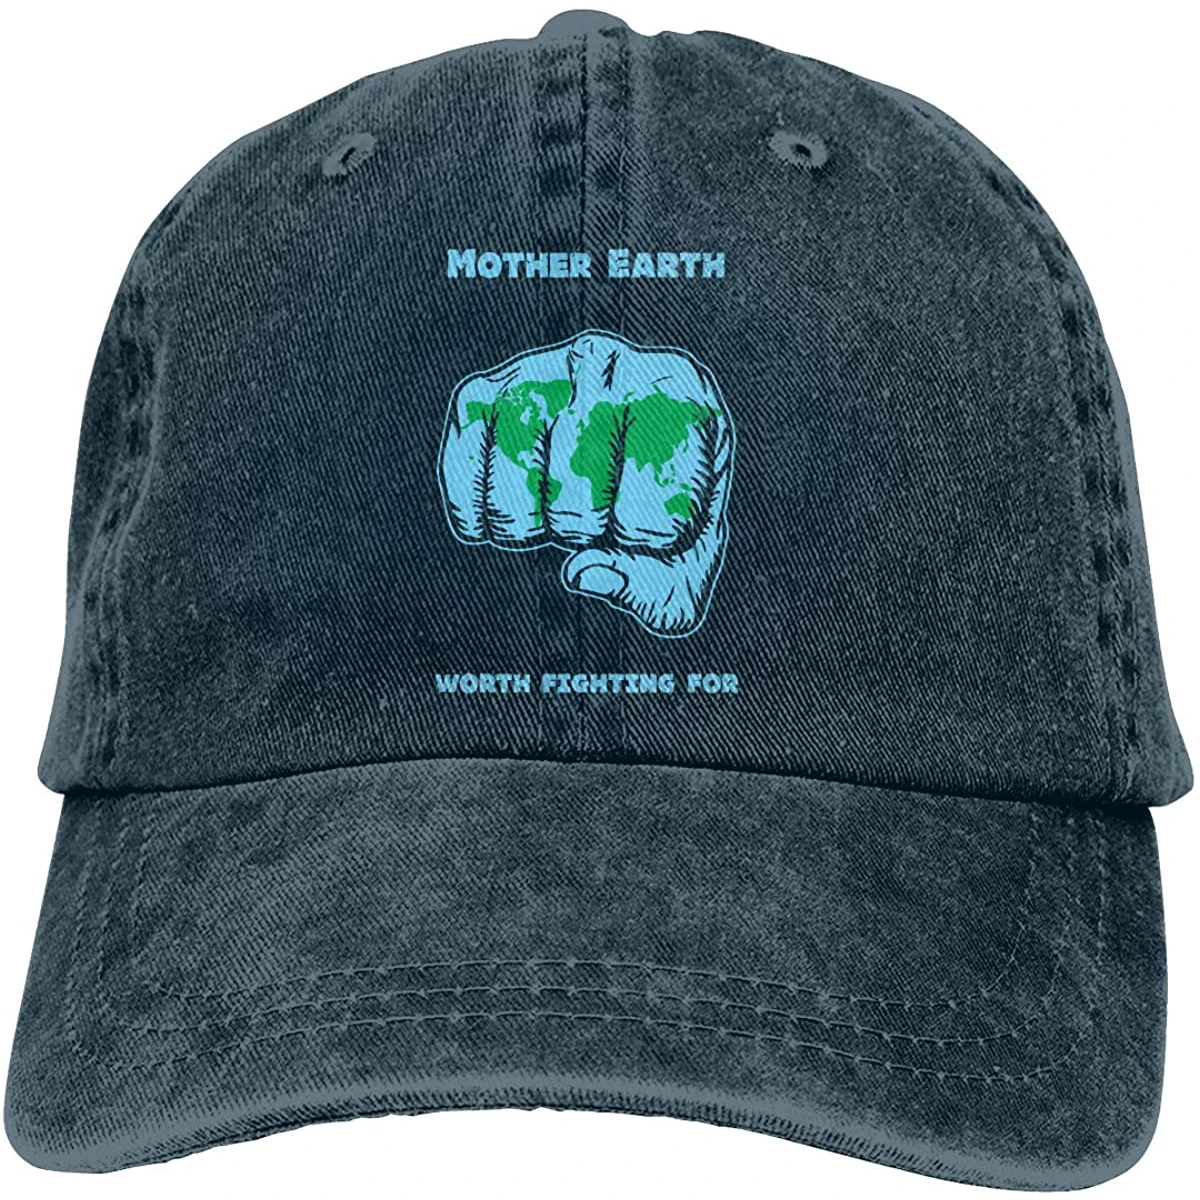 

Unisex Mother Earth Vintage Washed Twill Baseball Caps Adjustable Hats Funny Humor Irony Graphics Of Adult Gift Navy